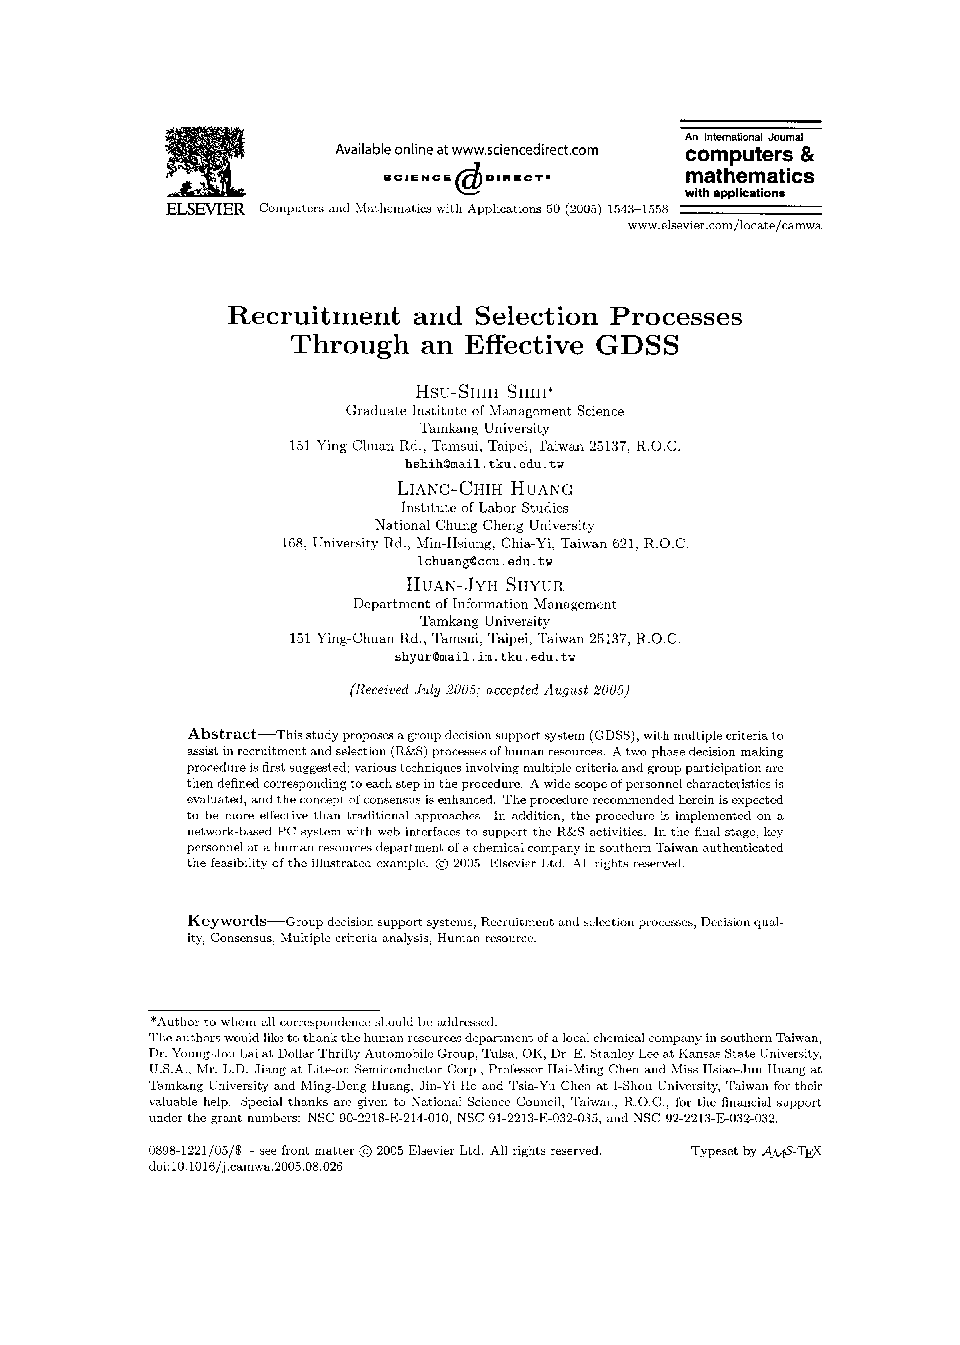 Recruitment and selection processes through an effective GDSS